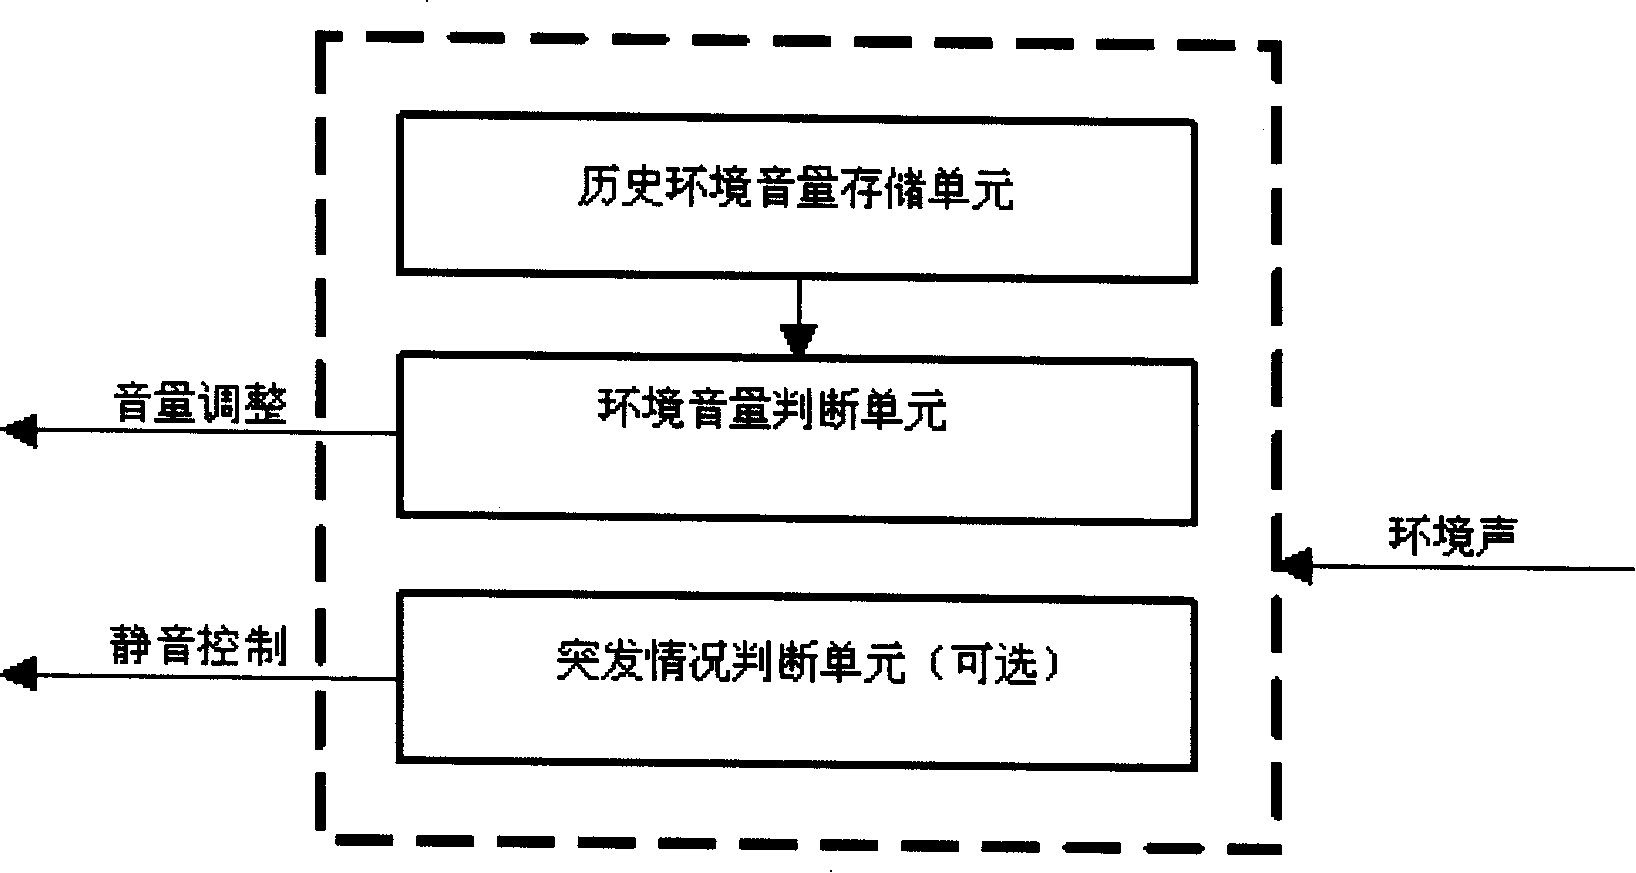 Earphone device with automatic volume control function